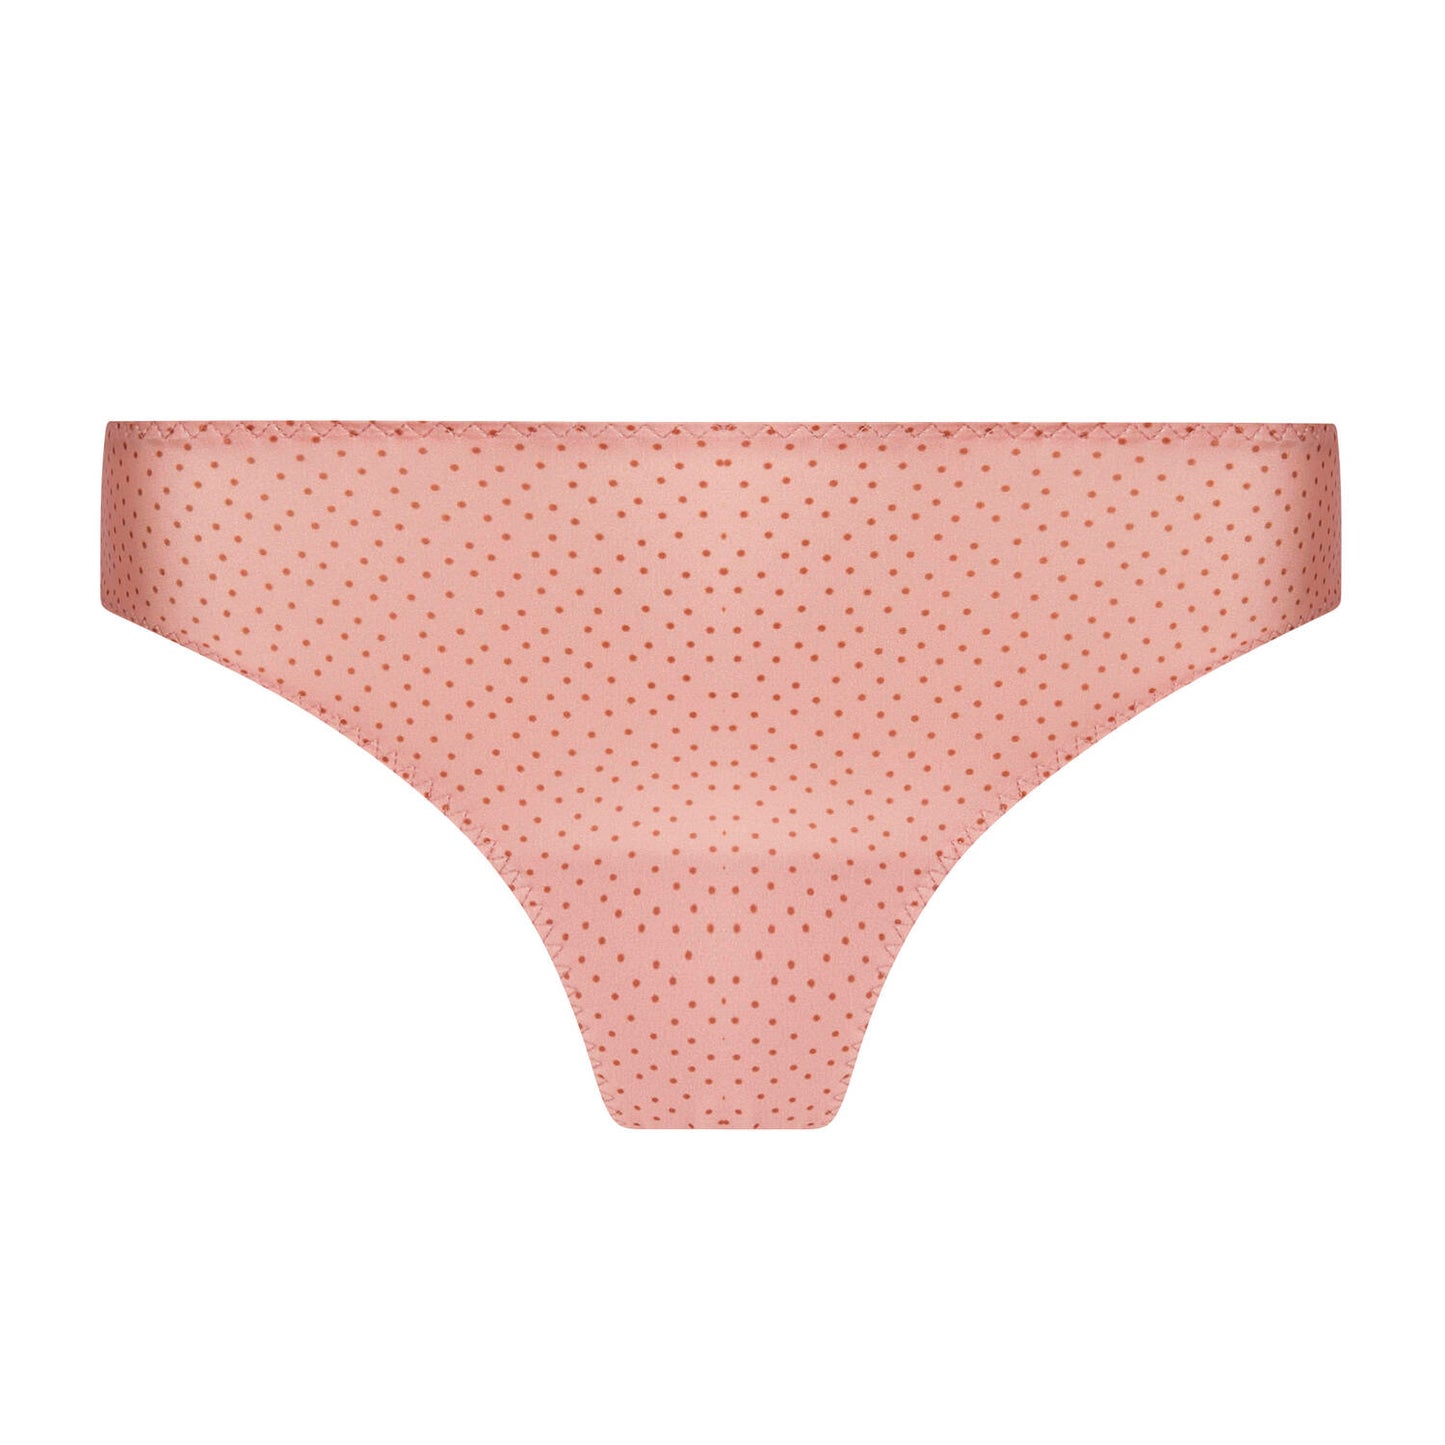 Petille Glam in Sparkling Rosé Tanga By Antigel - S-XXL